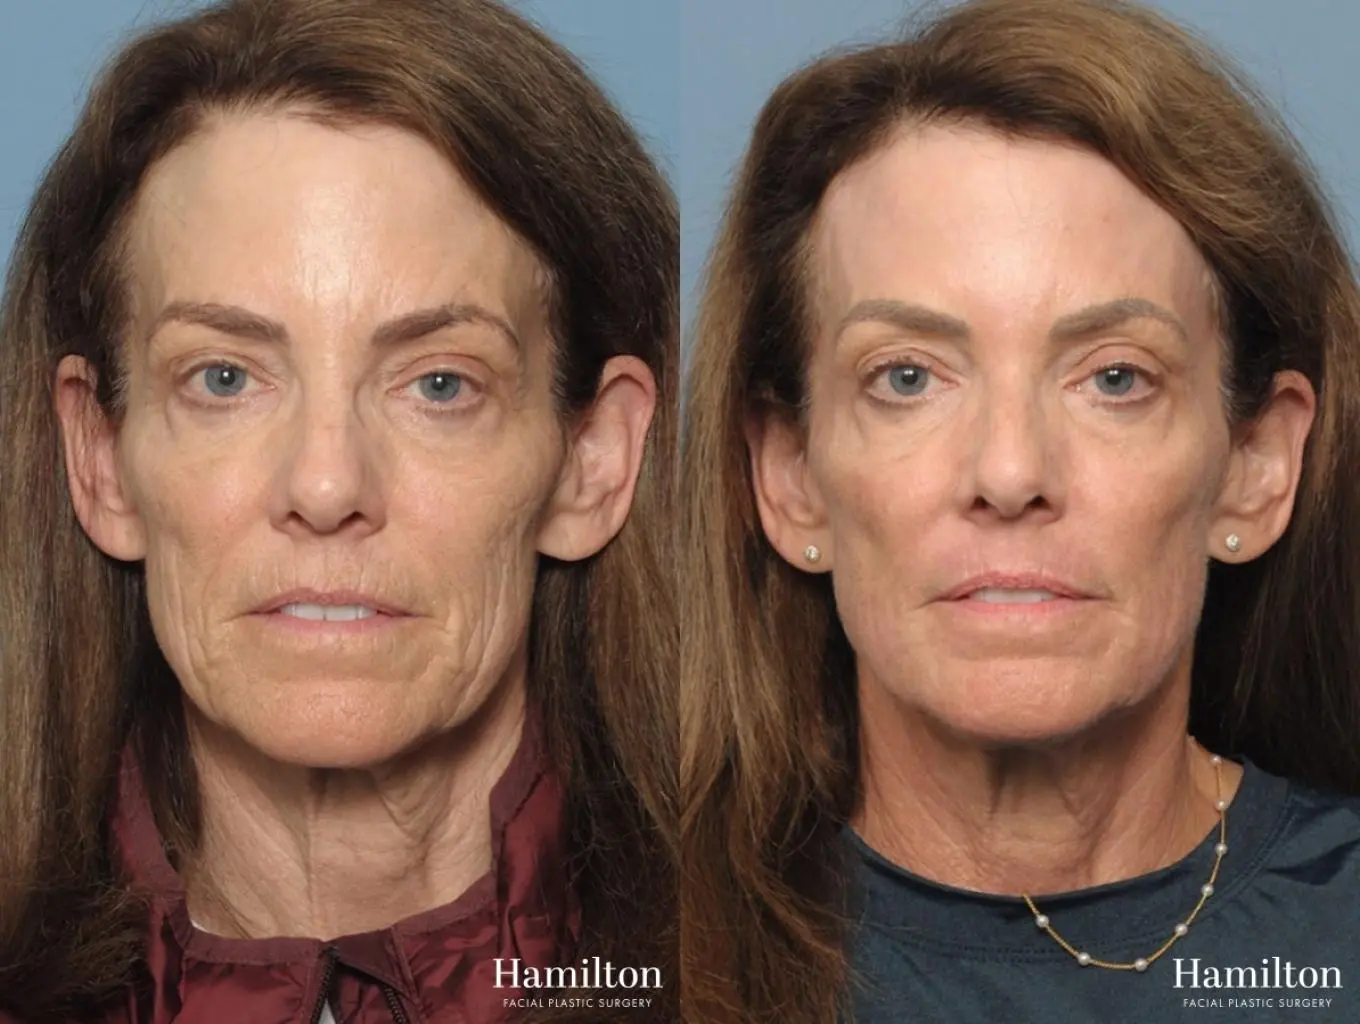 C02 Laser: Patient 3 - Before and After 1